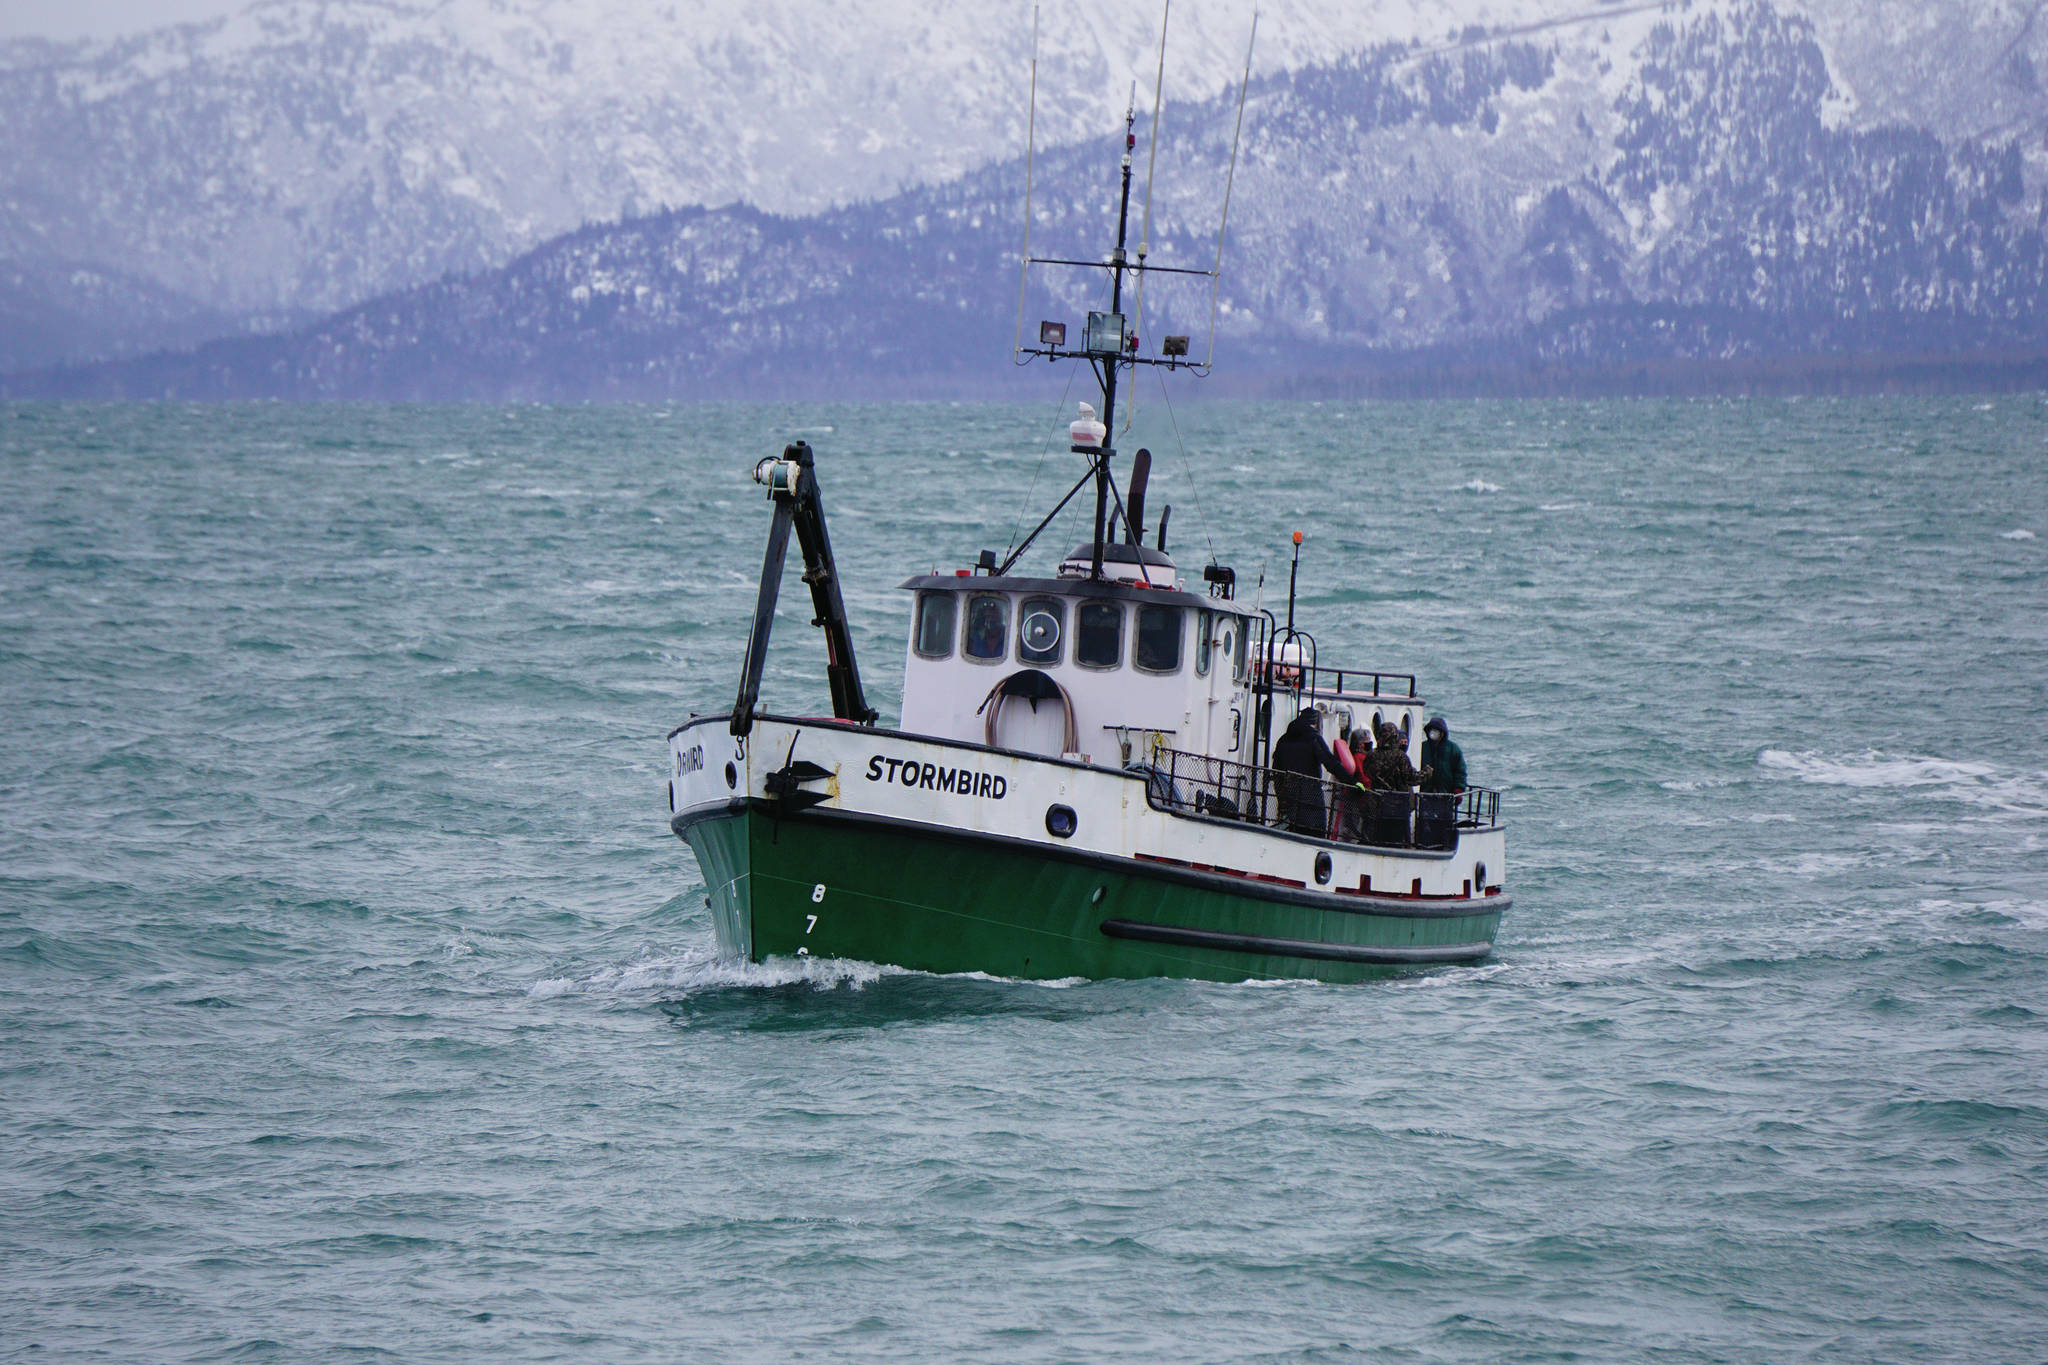 The Stormbird comes into the Homer Harbor on Thursday, Jan. 28, 2021, in Homer, Alaska. (Photo by Michael Armstrong/Homer News)